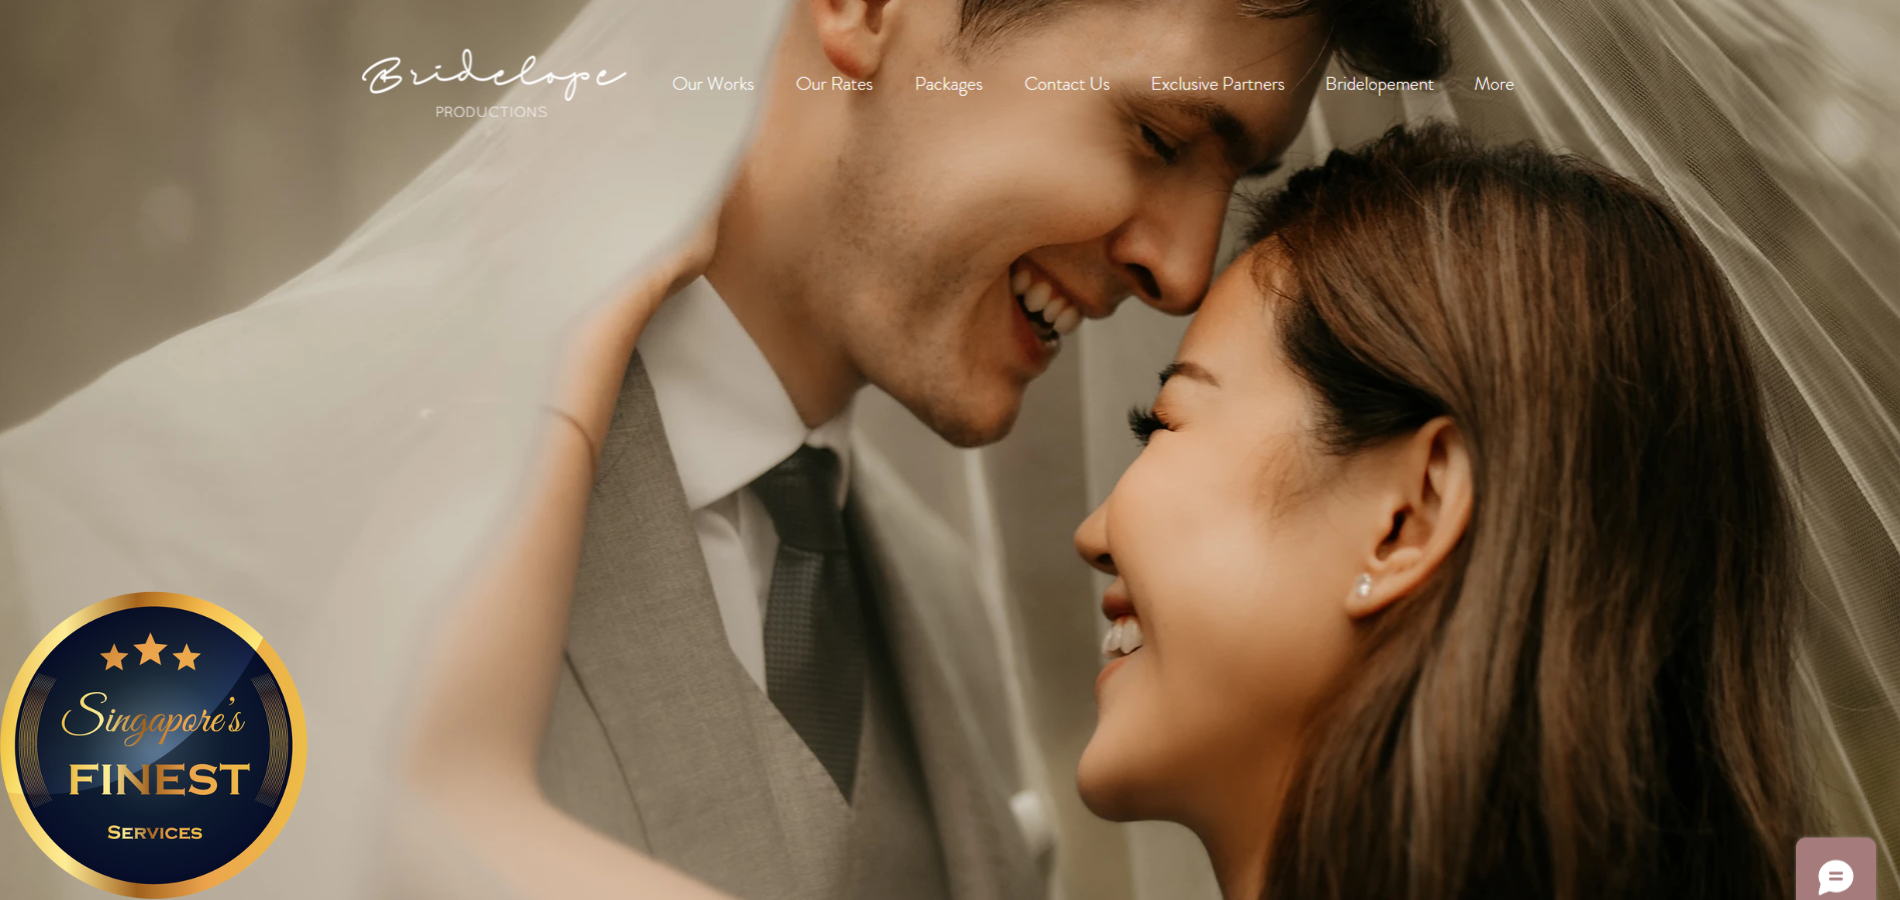 The Finest Wedding Photographers in Singapore